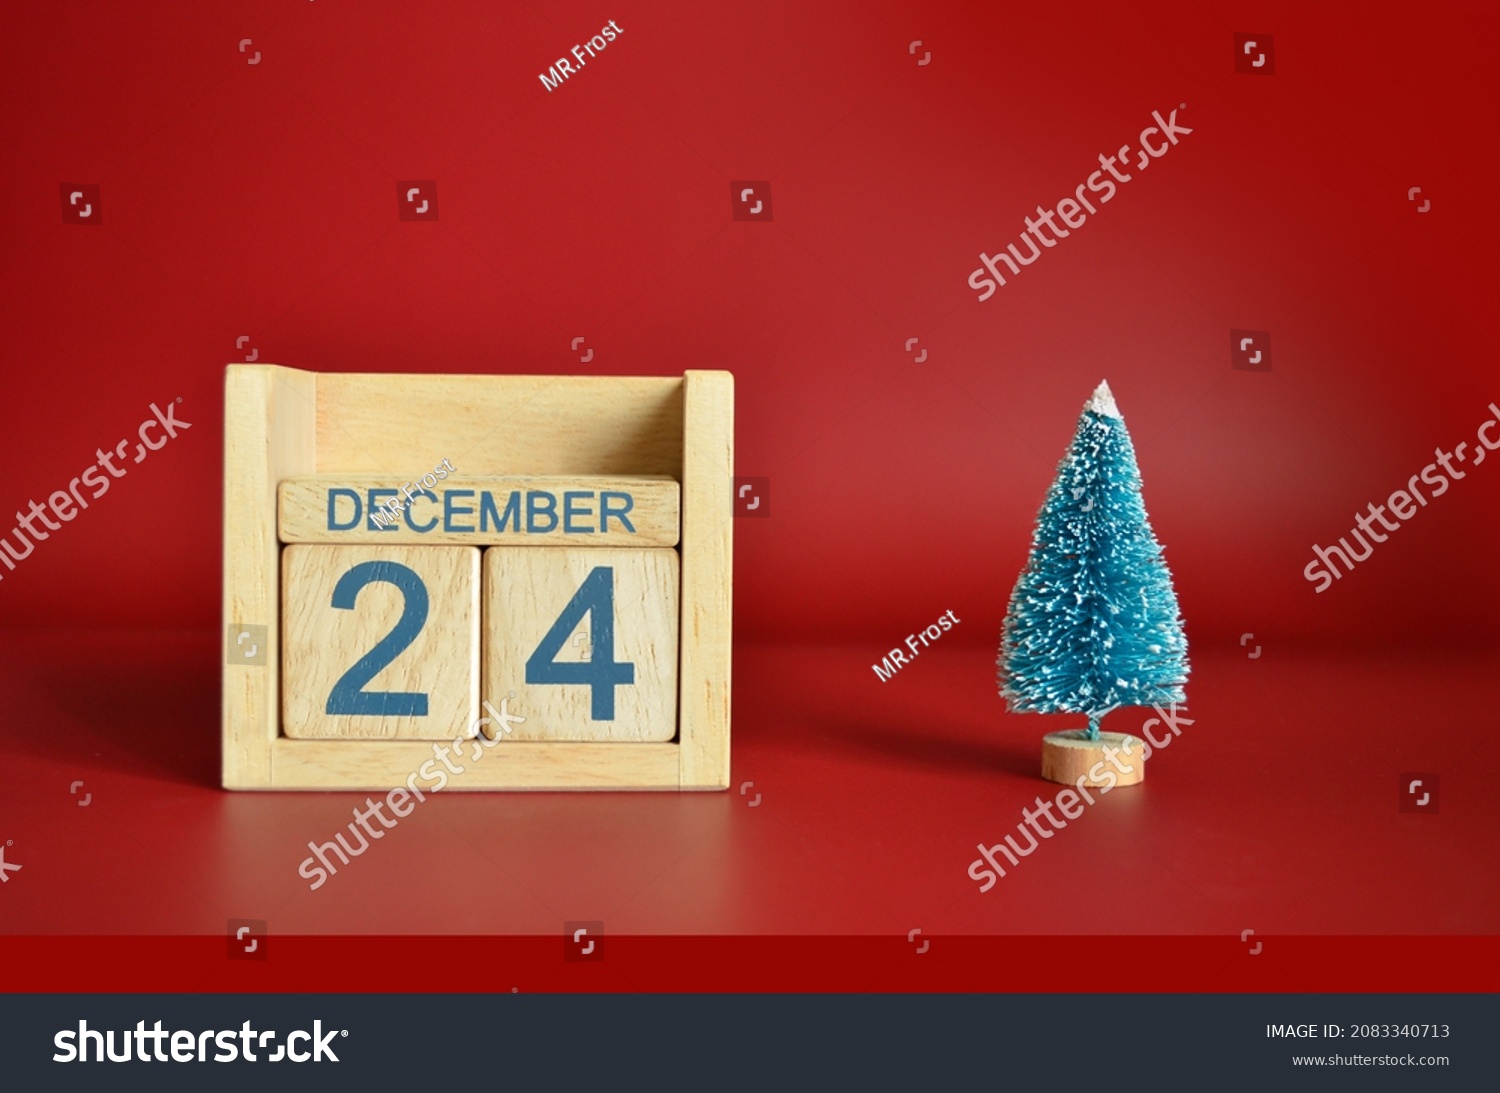 December 24, Calendar design with Christmas tree on red table background. #2083340713